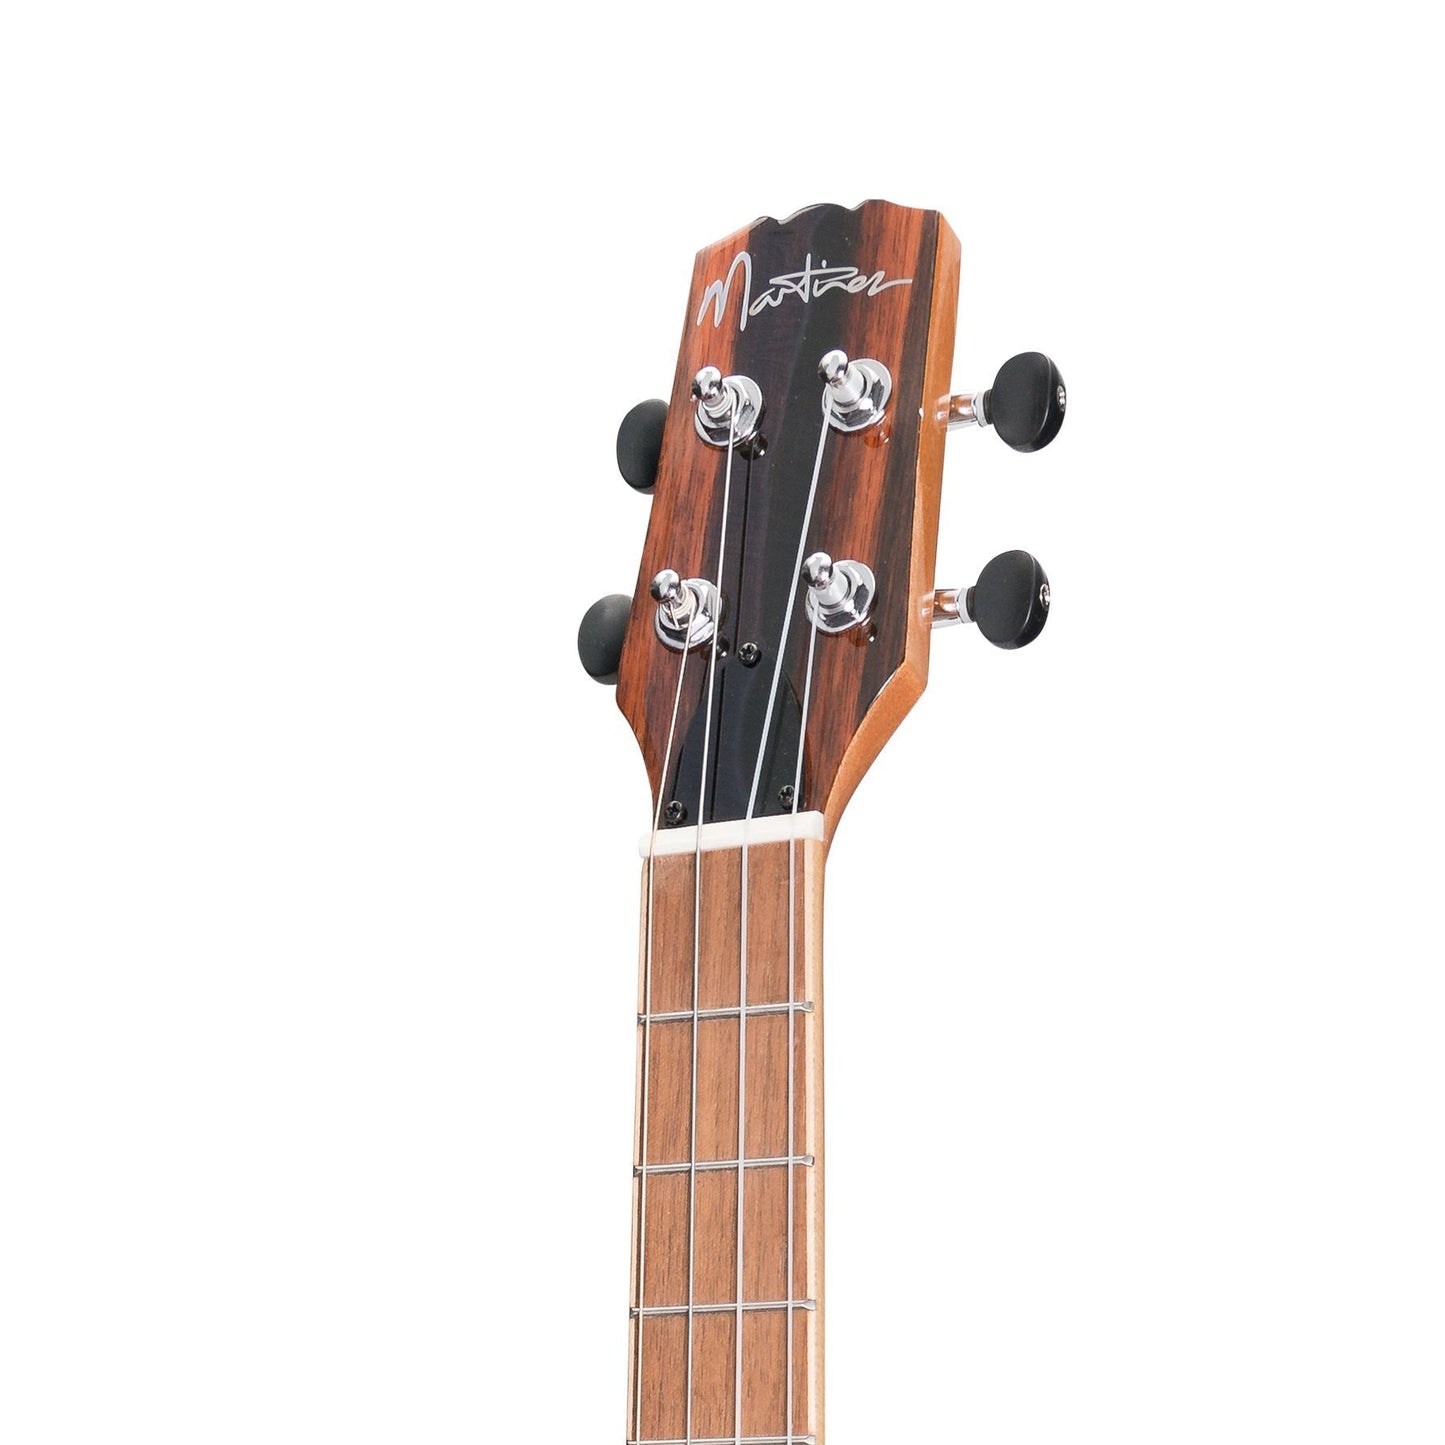 Martinez 'Southern Belle 7 Series' Spruce Solid Top Electric Baritone Ukulele with Hard Case (Natural Gloss)